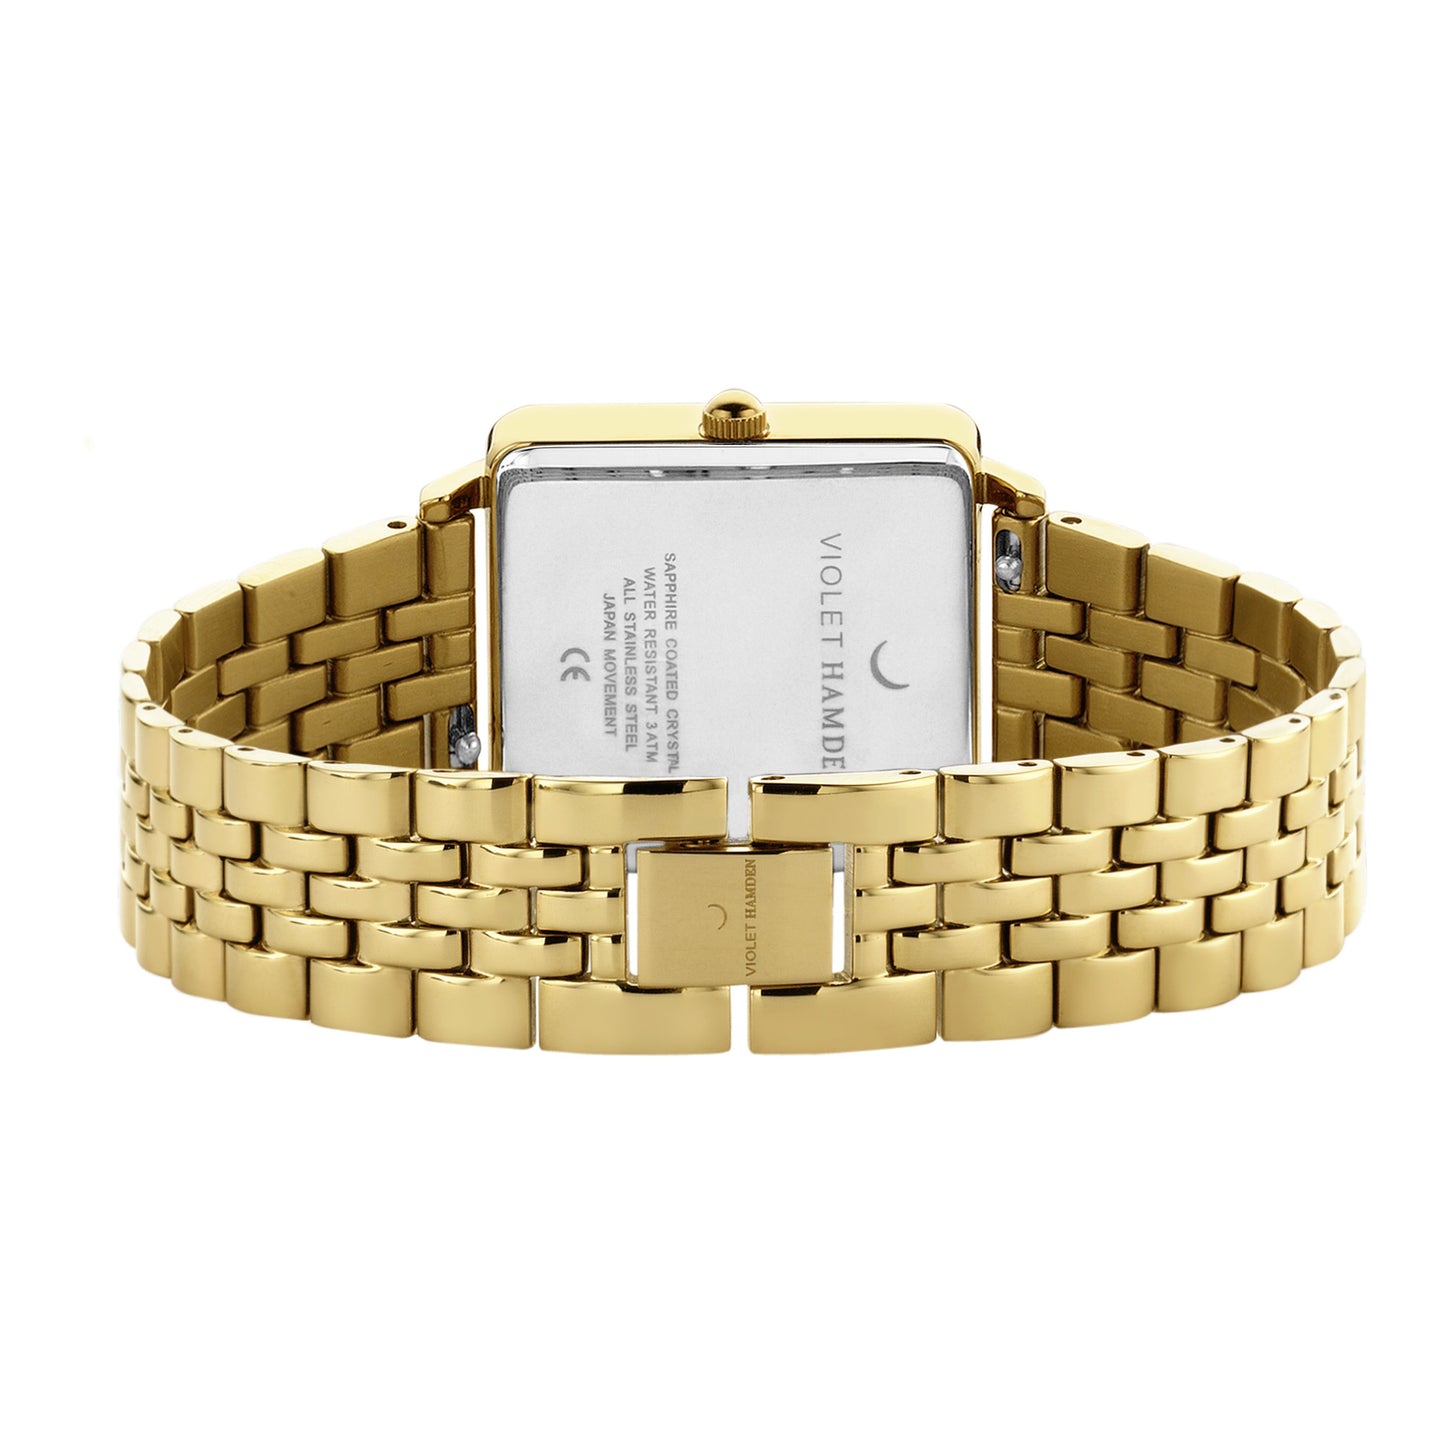 Dawn Base square ladies watch gold coloured and black